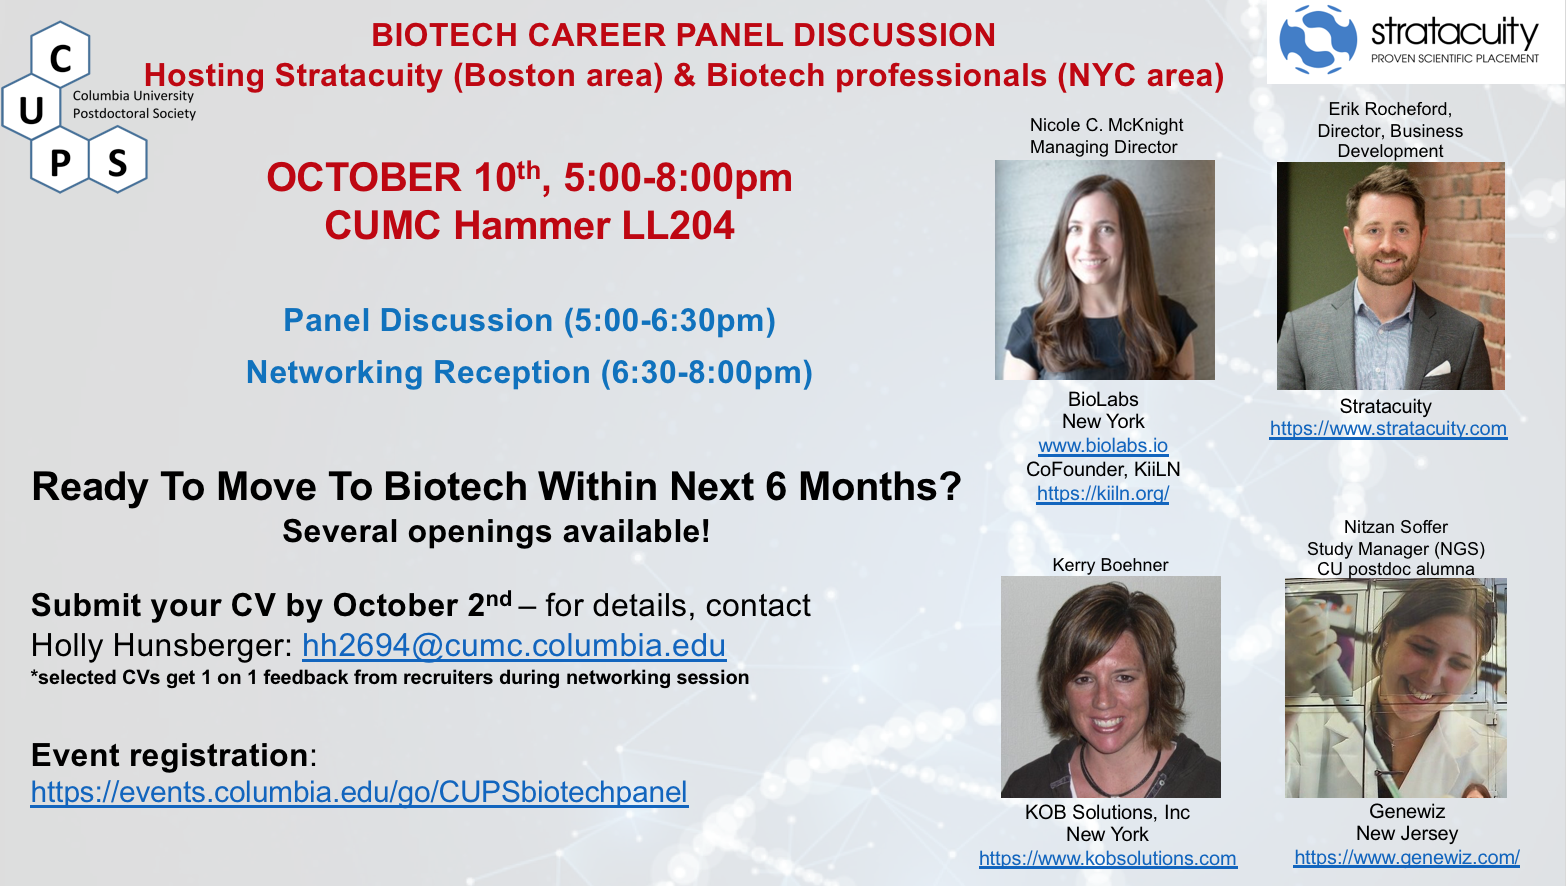 biotech-career-panel-discussion-october-2018